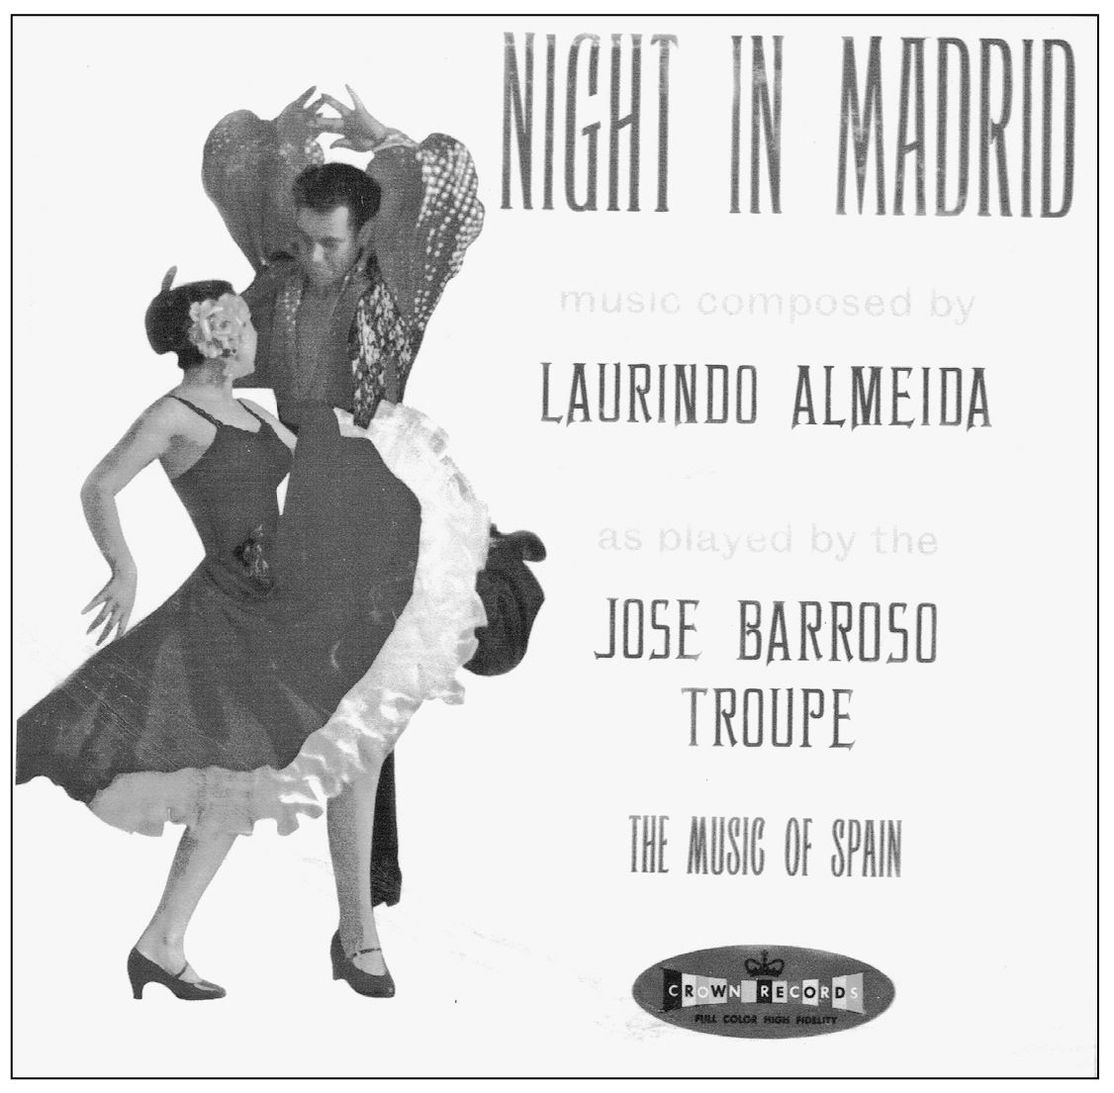 Rancho life inspired Spanish music and dance This c 1950 album cover shows - photo 8